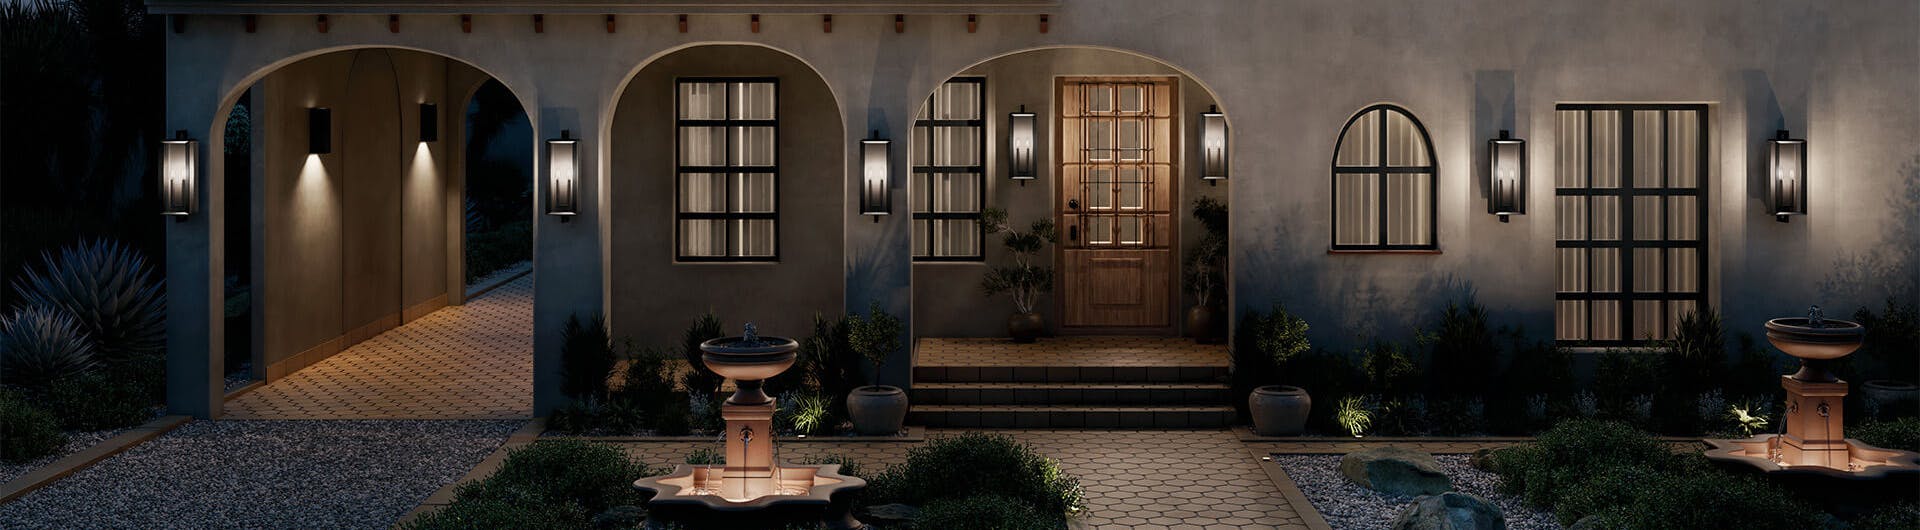 Exterior image of a grand front entrance lit up with Kroft exterior wall lights at night